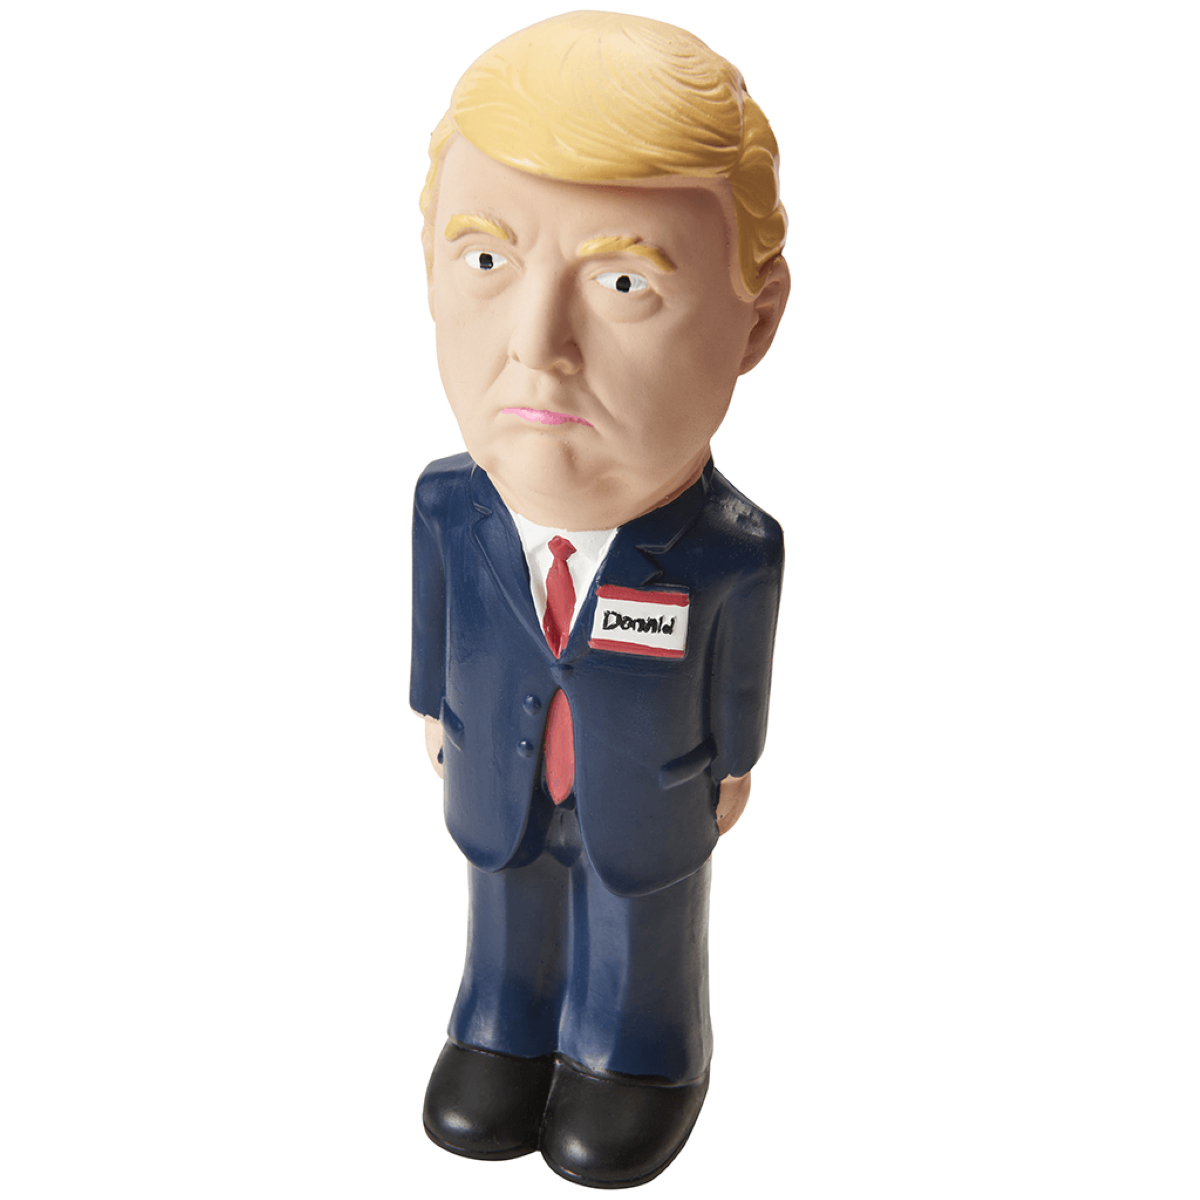 SPOT Ethical Products Latex Candidates Donald Trump Dog Toy